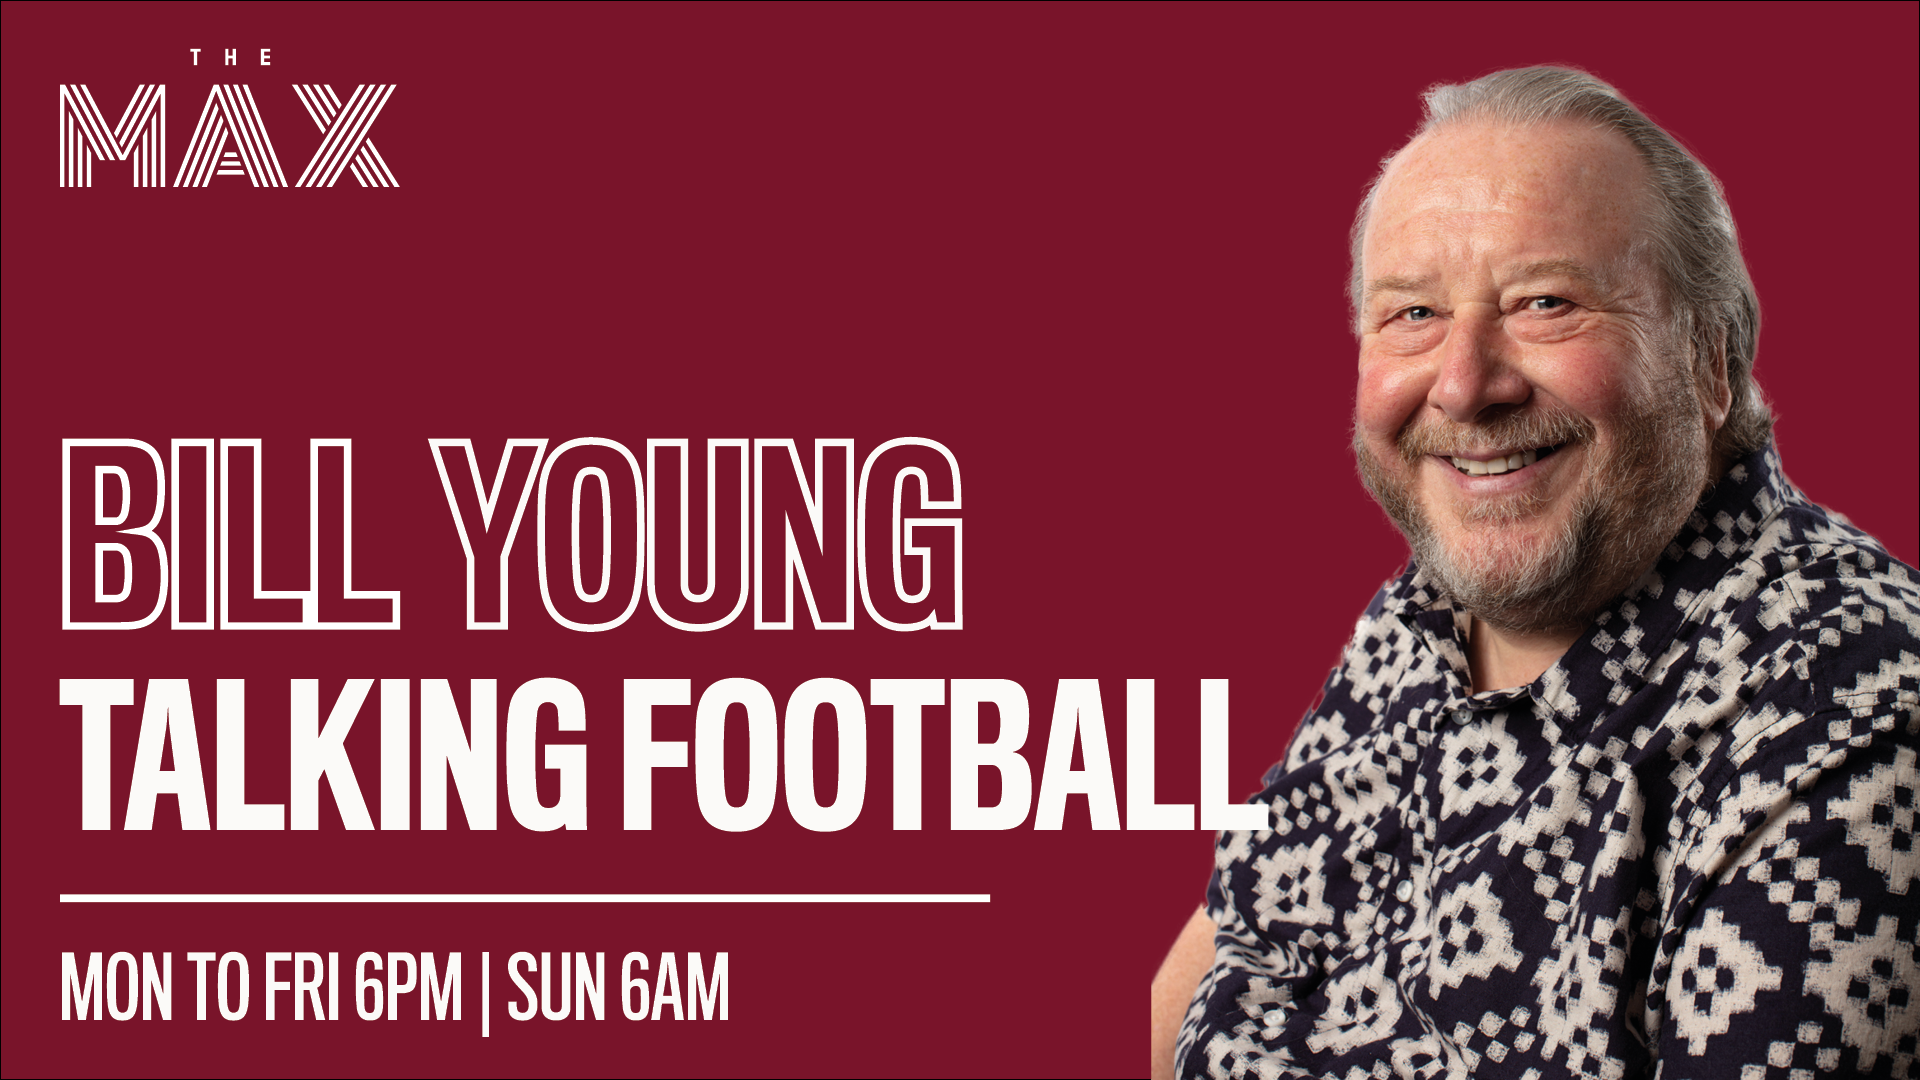 Talking Football with Bill Young - Thursday 25th March